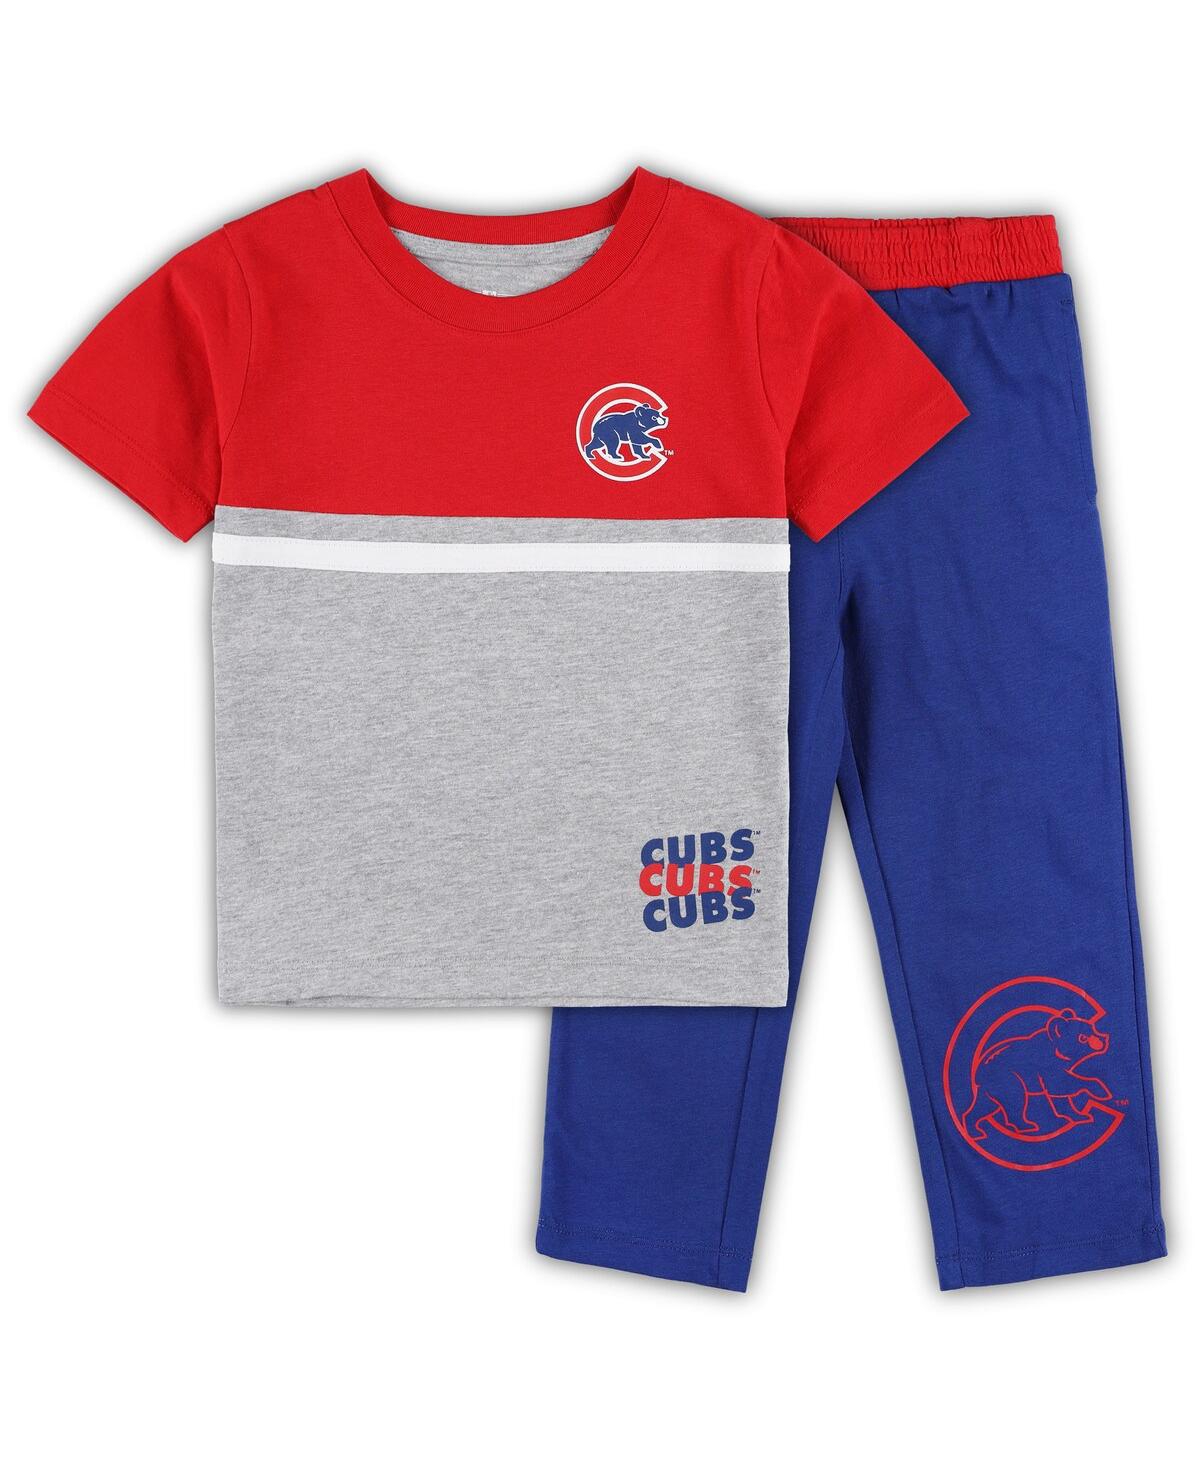 Outerstuff Babies' Toddler Boys And Girls Royal, Red Chicago Cubs Batters Box T-shirt And Pants Set In Royal,red